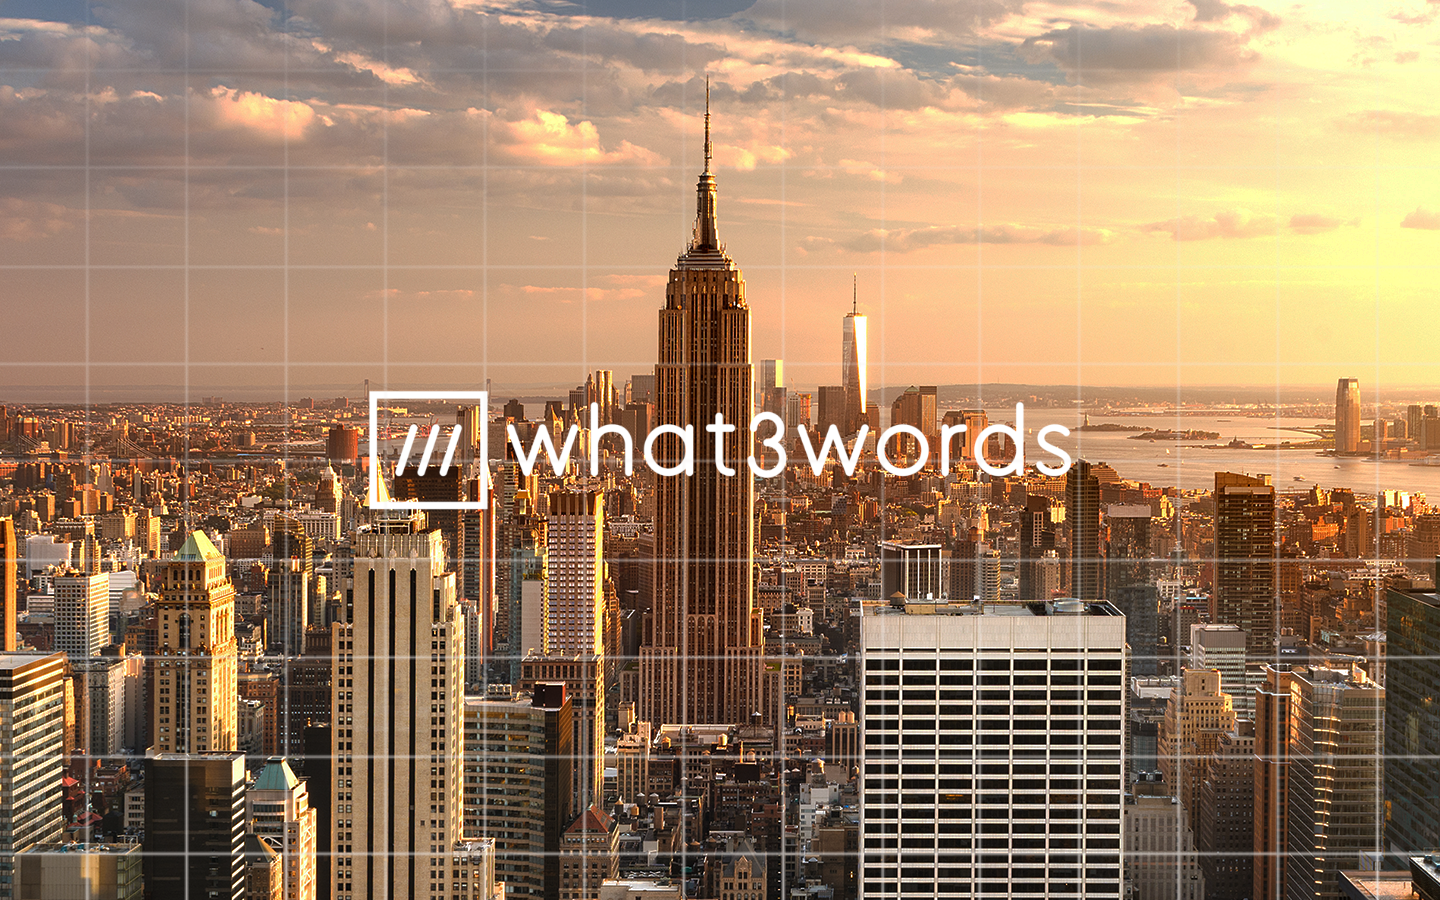 what3words grid coverage over New York City.